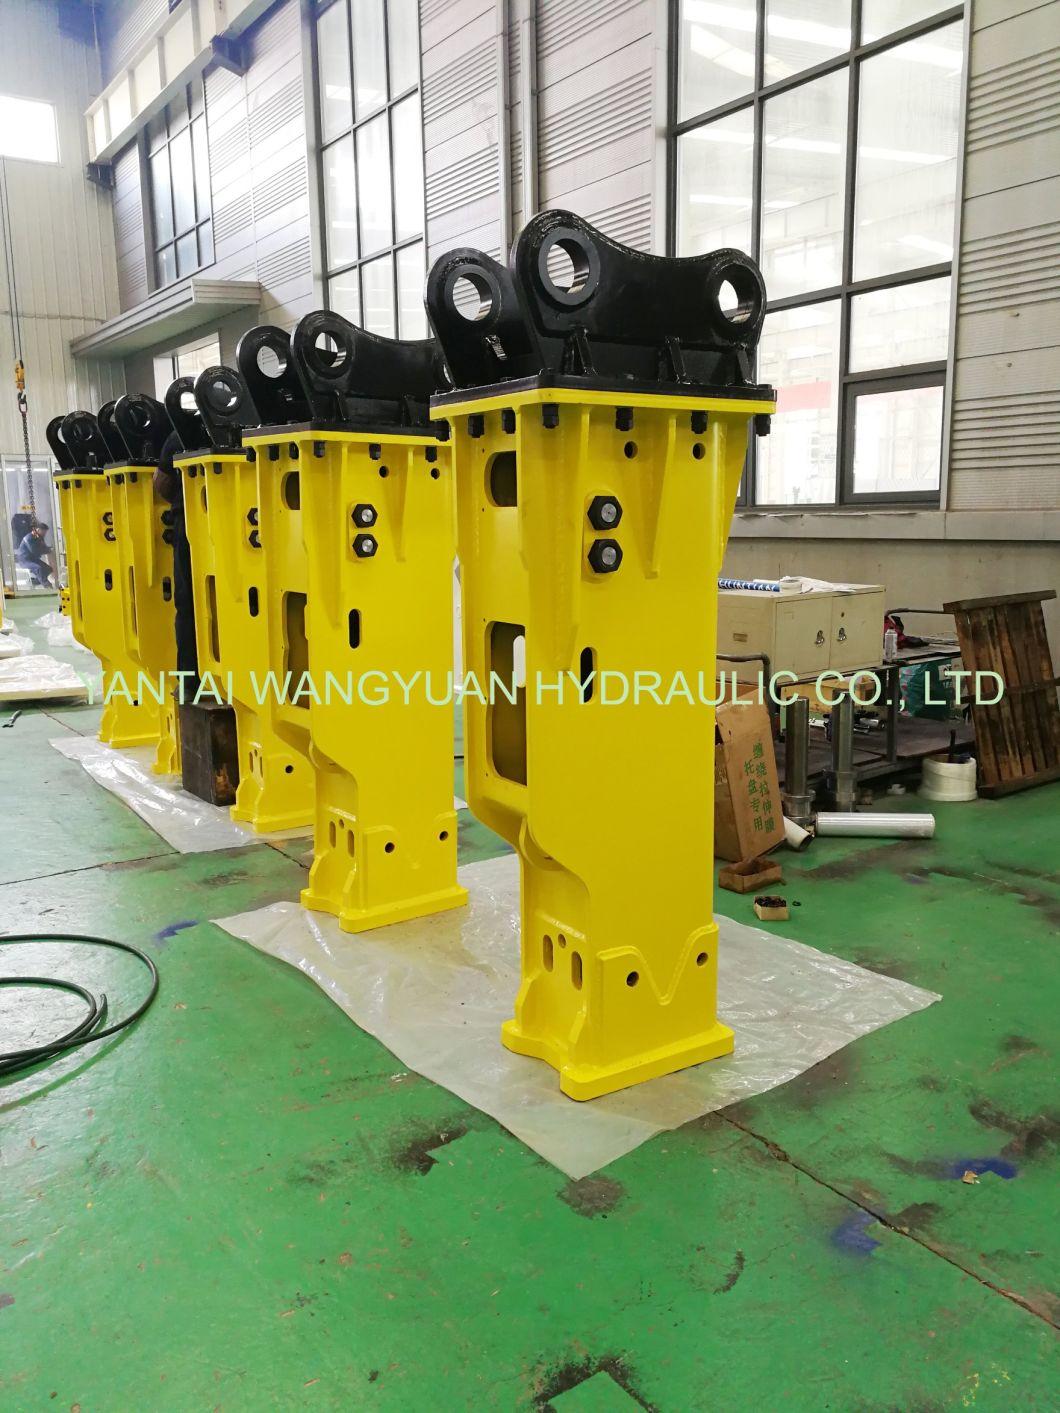 Hydraulic Hammer for 2.5-4.5 Tons Volvo Excavator